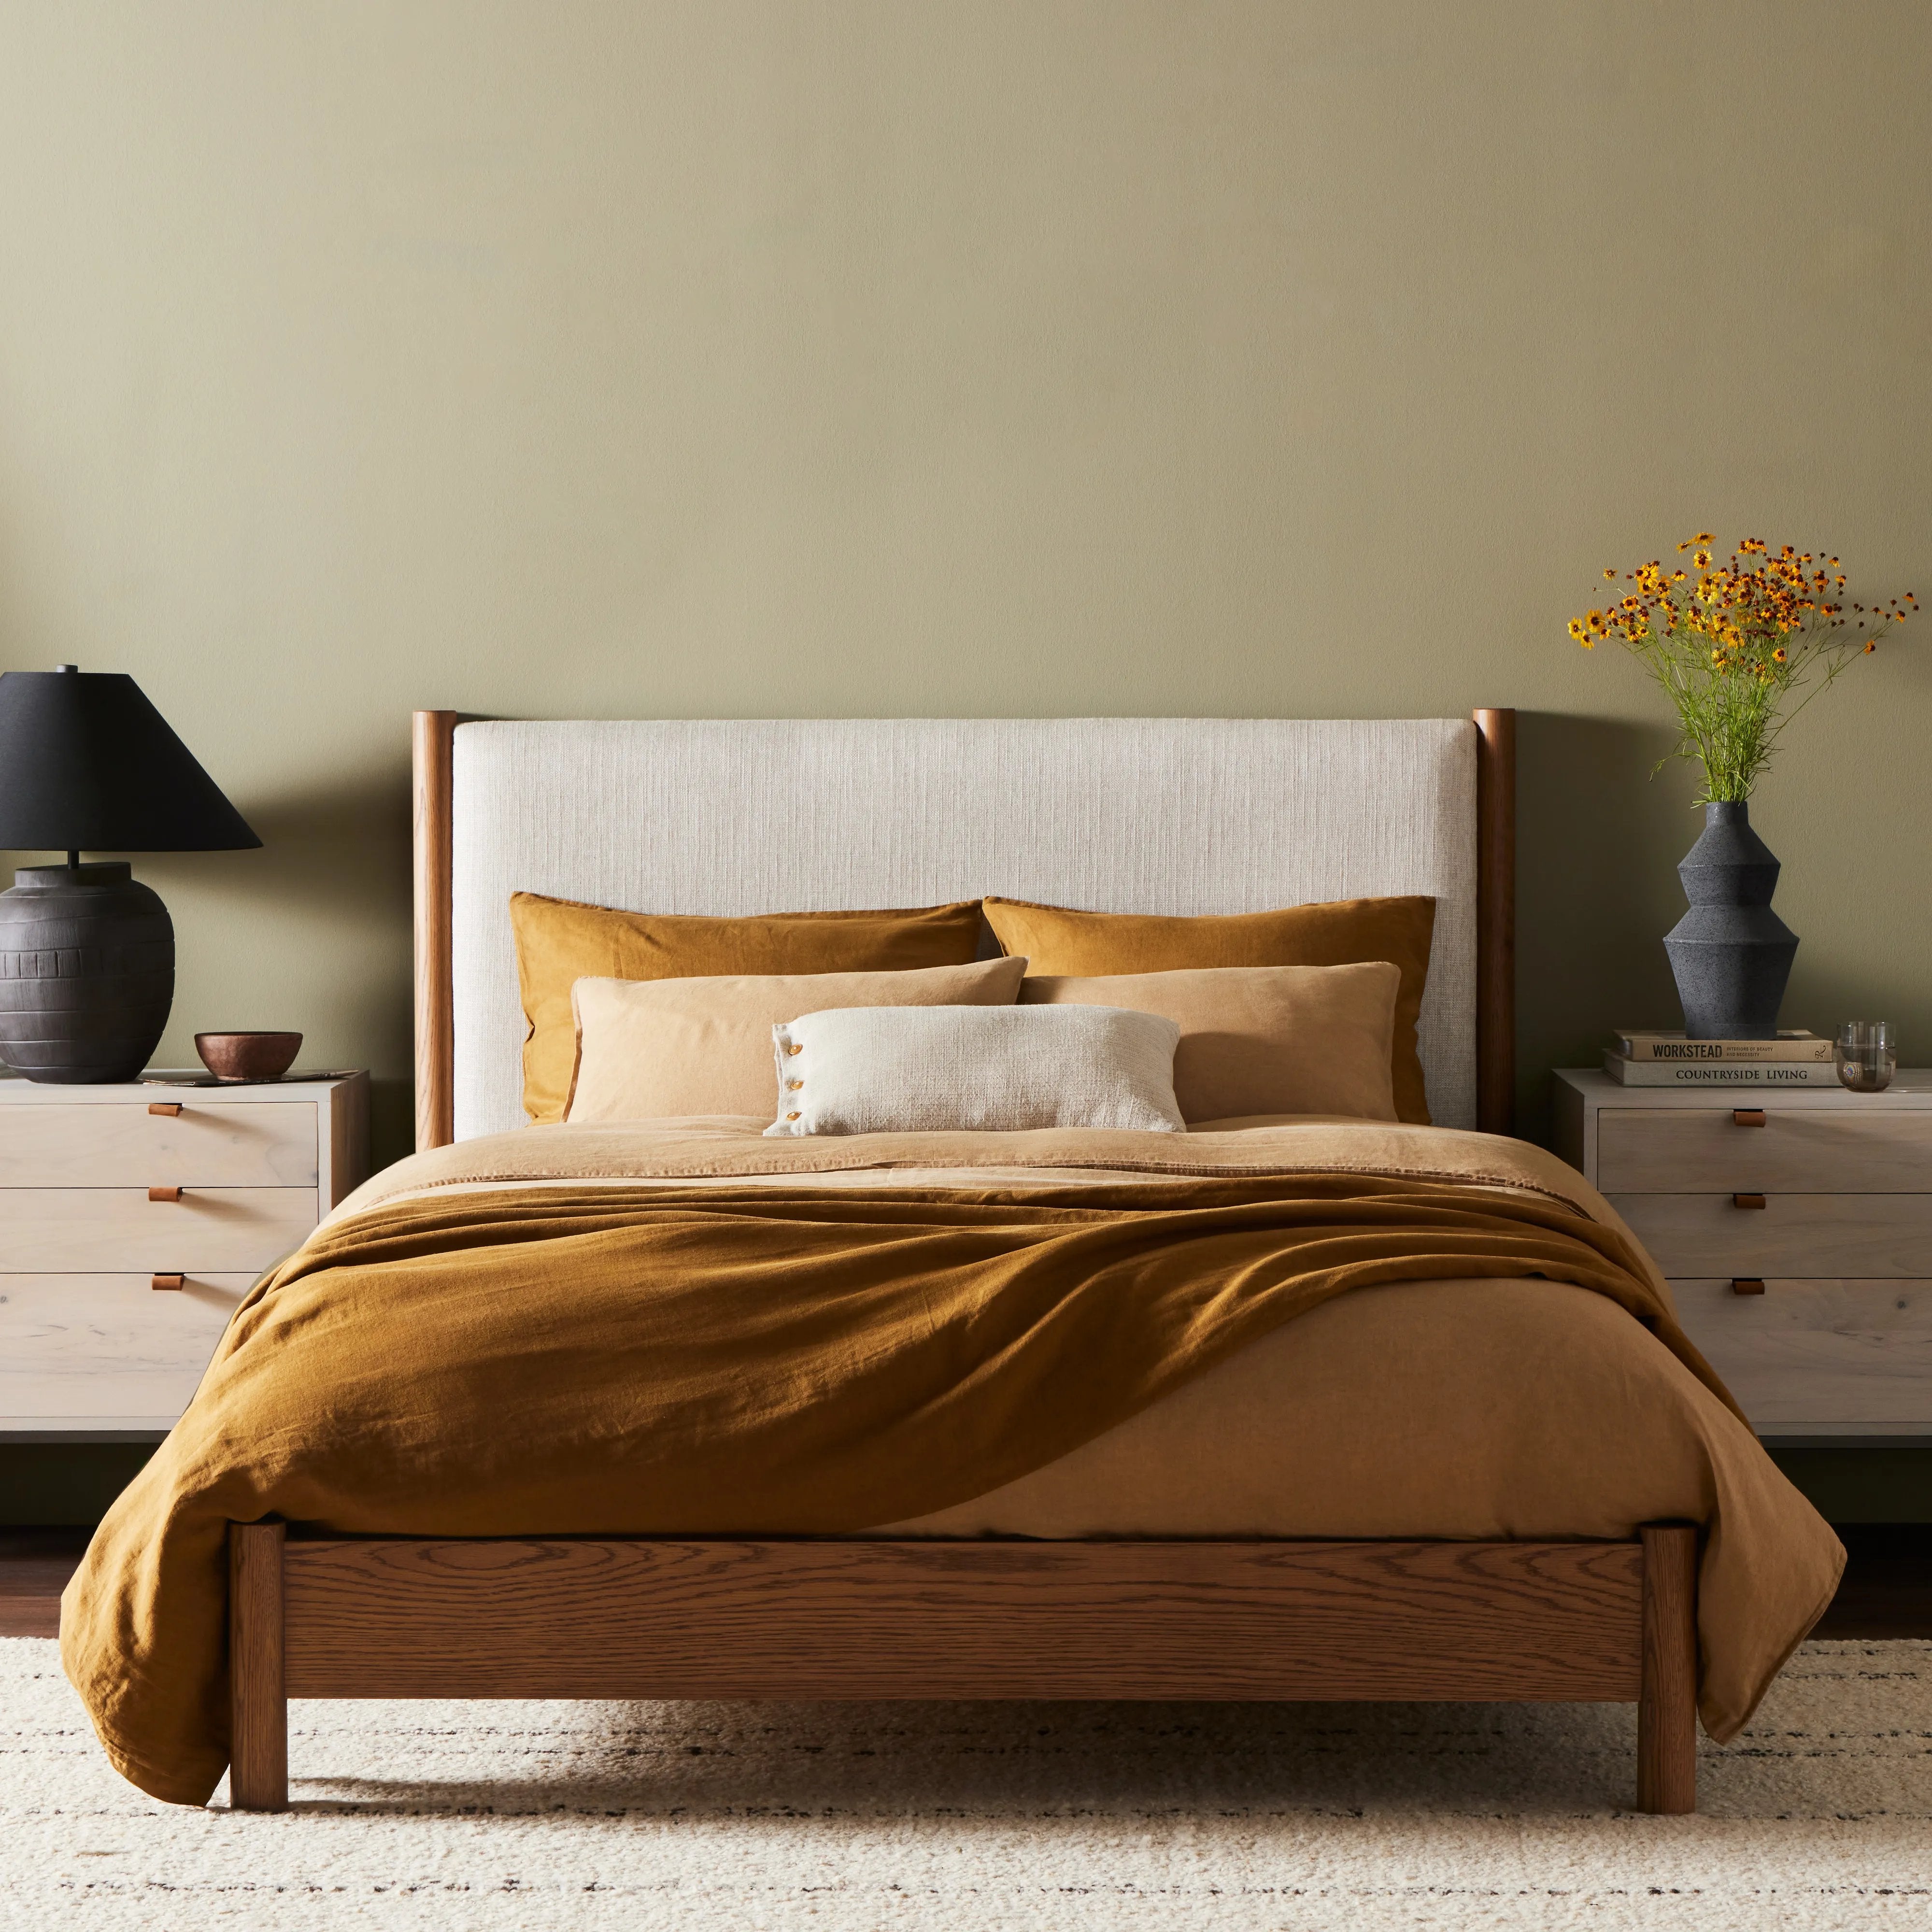 Rounded, chunky dowel legs in an amber oak finish frame the neutral, linen-like upholstered headboard of this bed frame.Collection: Bolto Amethyst Home provides interior design, new home construction design consulting, vintage area rugs, and lighting in the Washington metro area.